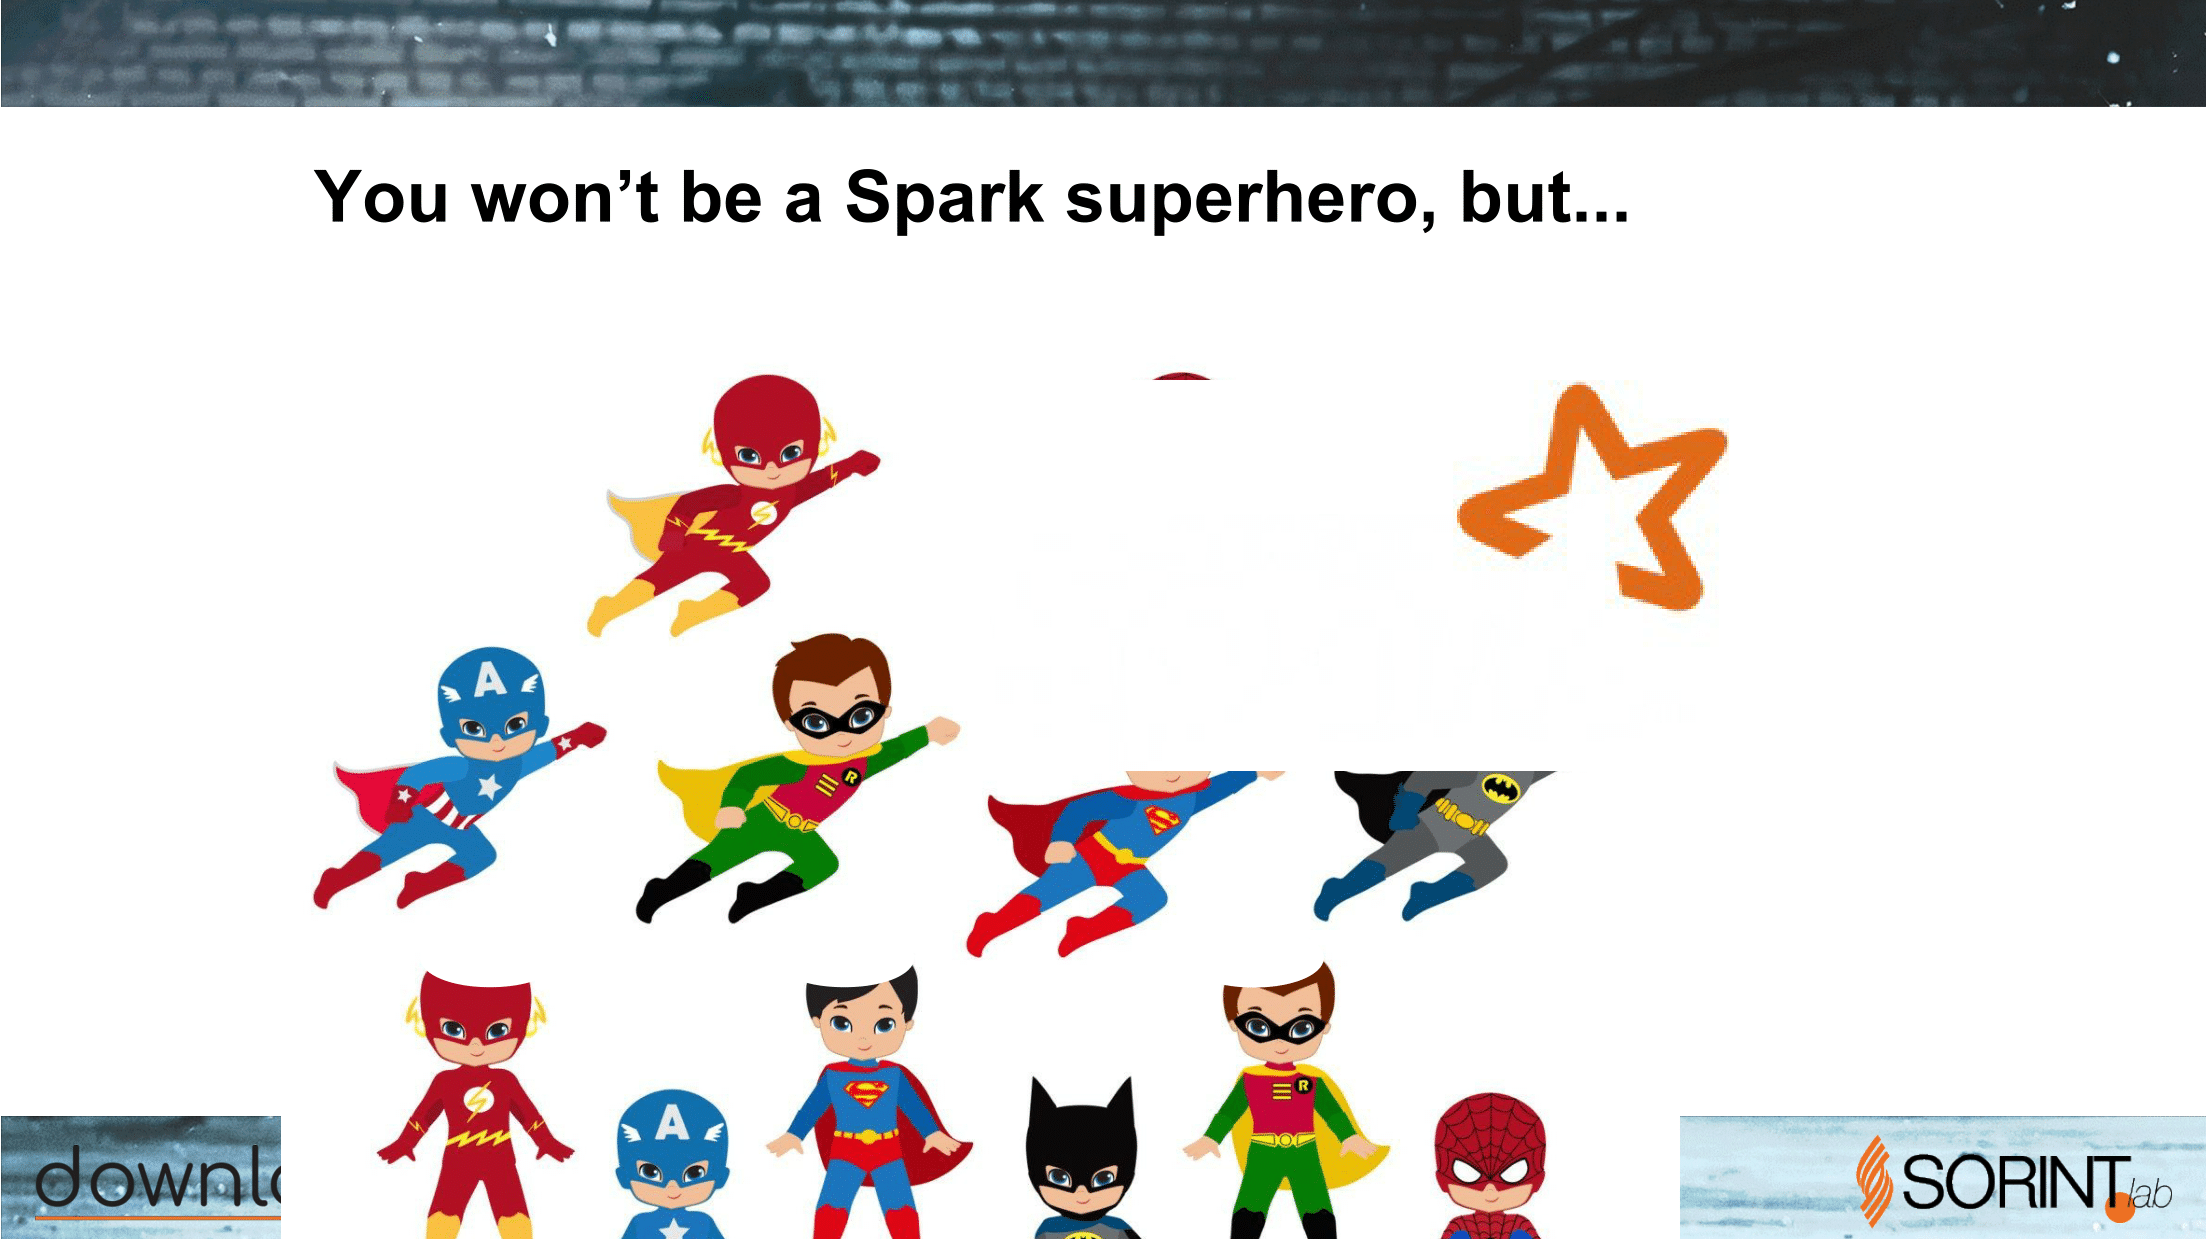 Apache_Spark_What_Why_When-70.png